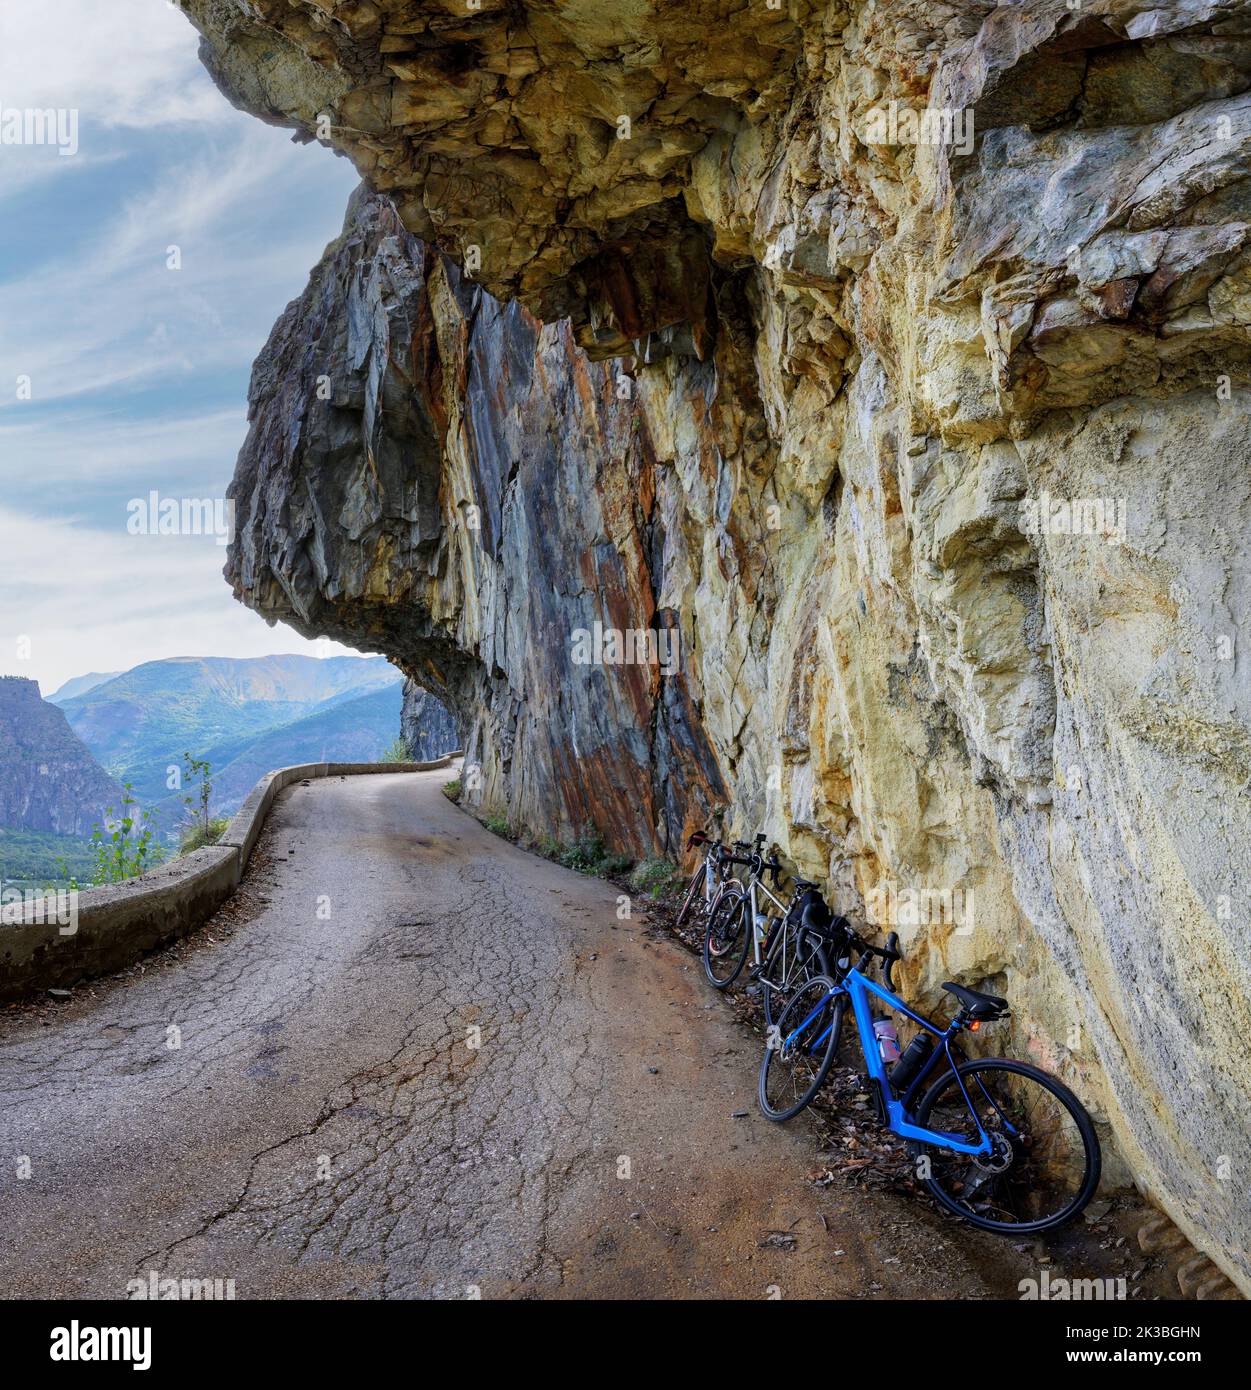 The famous balcony road that links Bourg d'Oisans to Villard Notre Dame, French Alps. Stock Photo